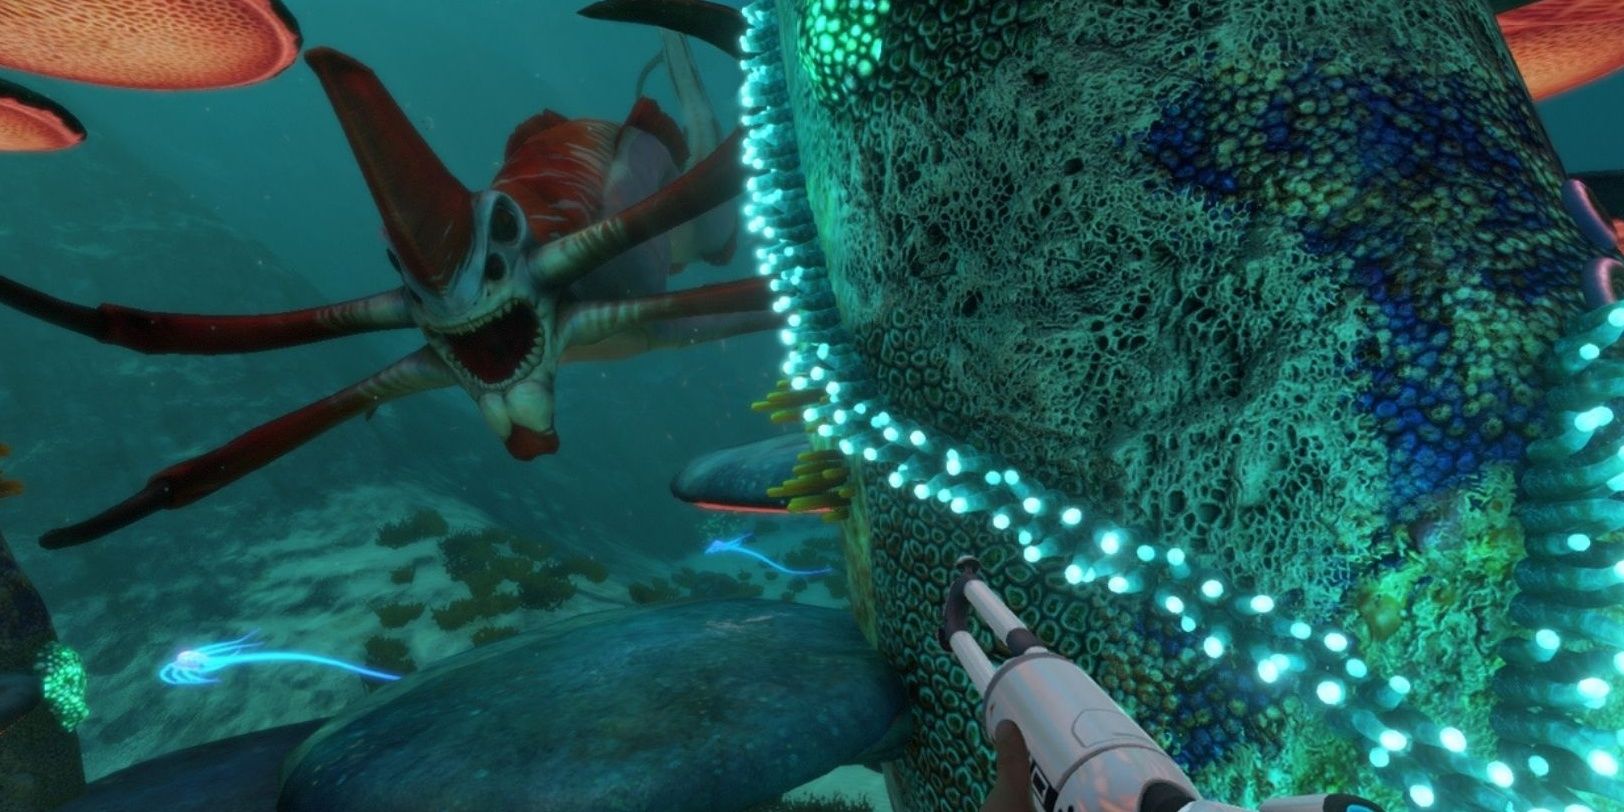 Reaper Leviathan poking its head from behind Mushroom stalk in Mushroom Forest in Subnautica